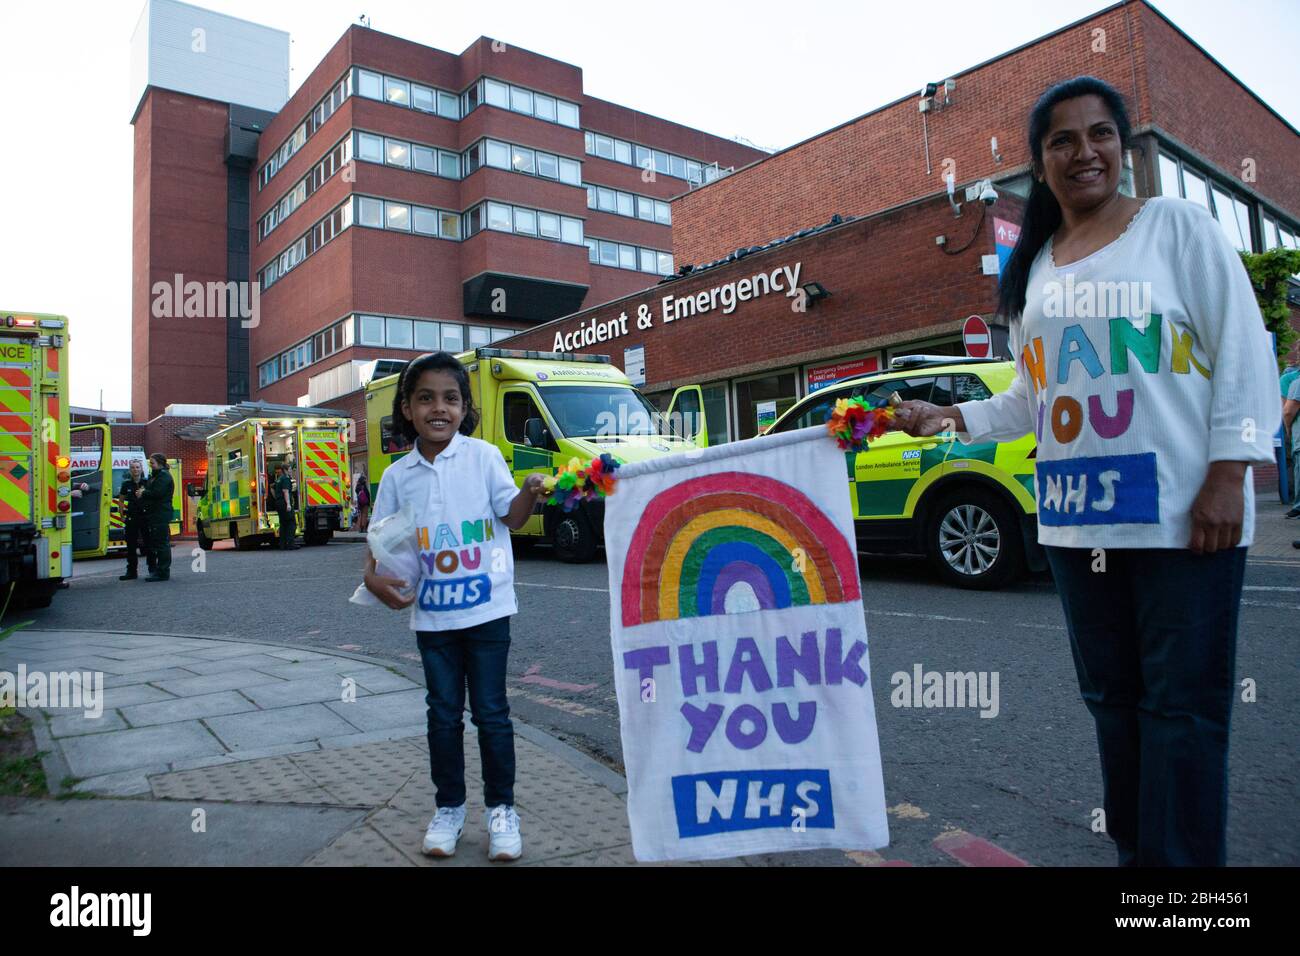 London, UK, 23 April 2020: medical and support staff gathered at the A&E ambulance bay at St George's Hospital, Tooting, to join Clap For Our Carers. This 4-year old girl, Eden, had made a rainbow banner and she and her mother wore home-made 'Thank You NHS' t-shirts. Anna Watson/Alamy Live News Stock Photo